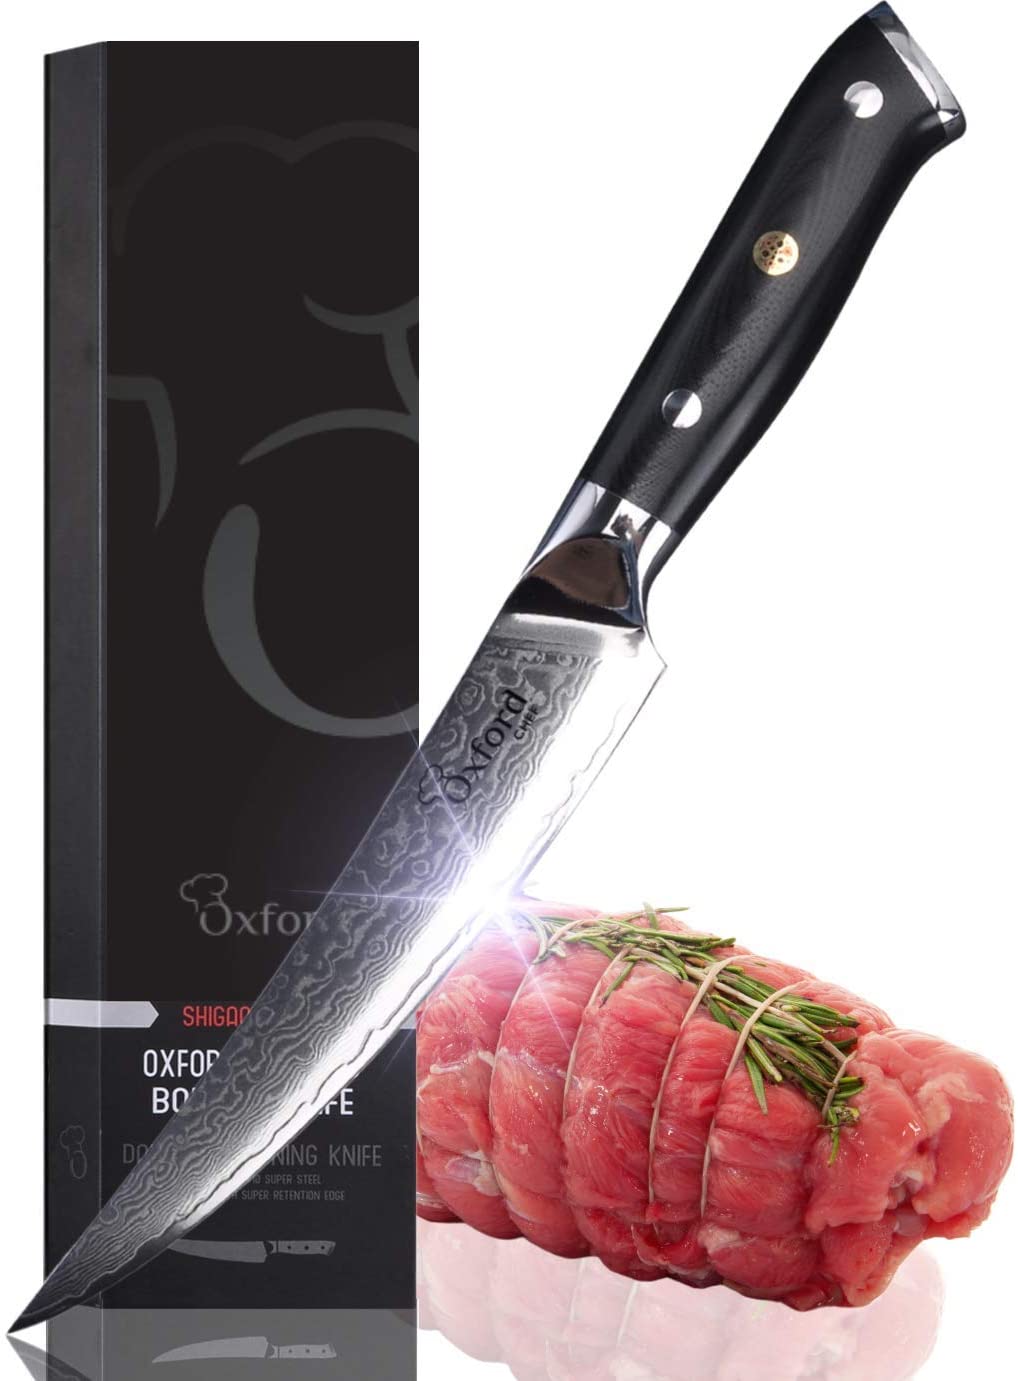 6.5'' Boning Knife for Meat Cutting